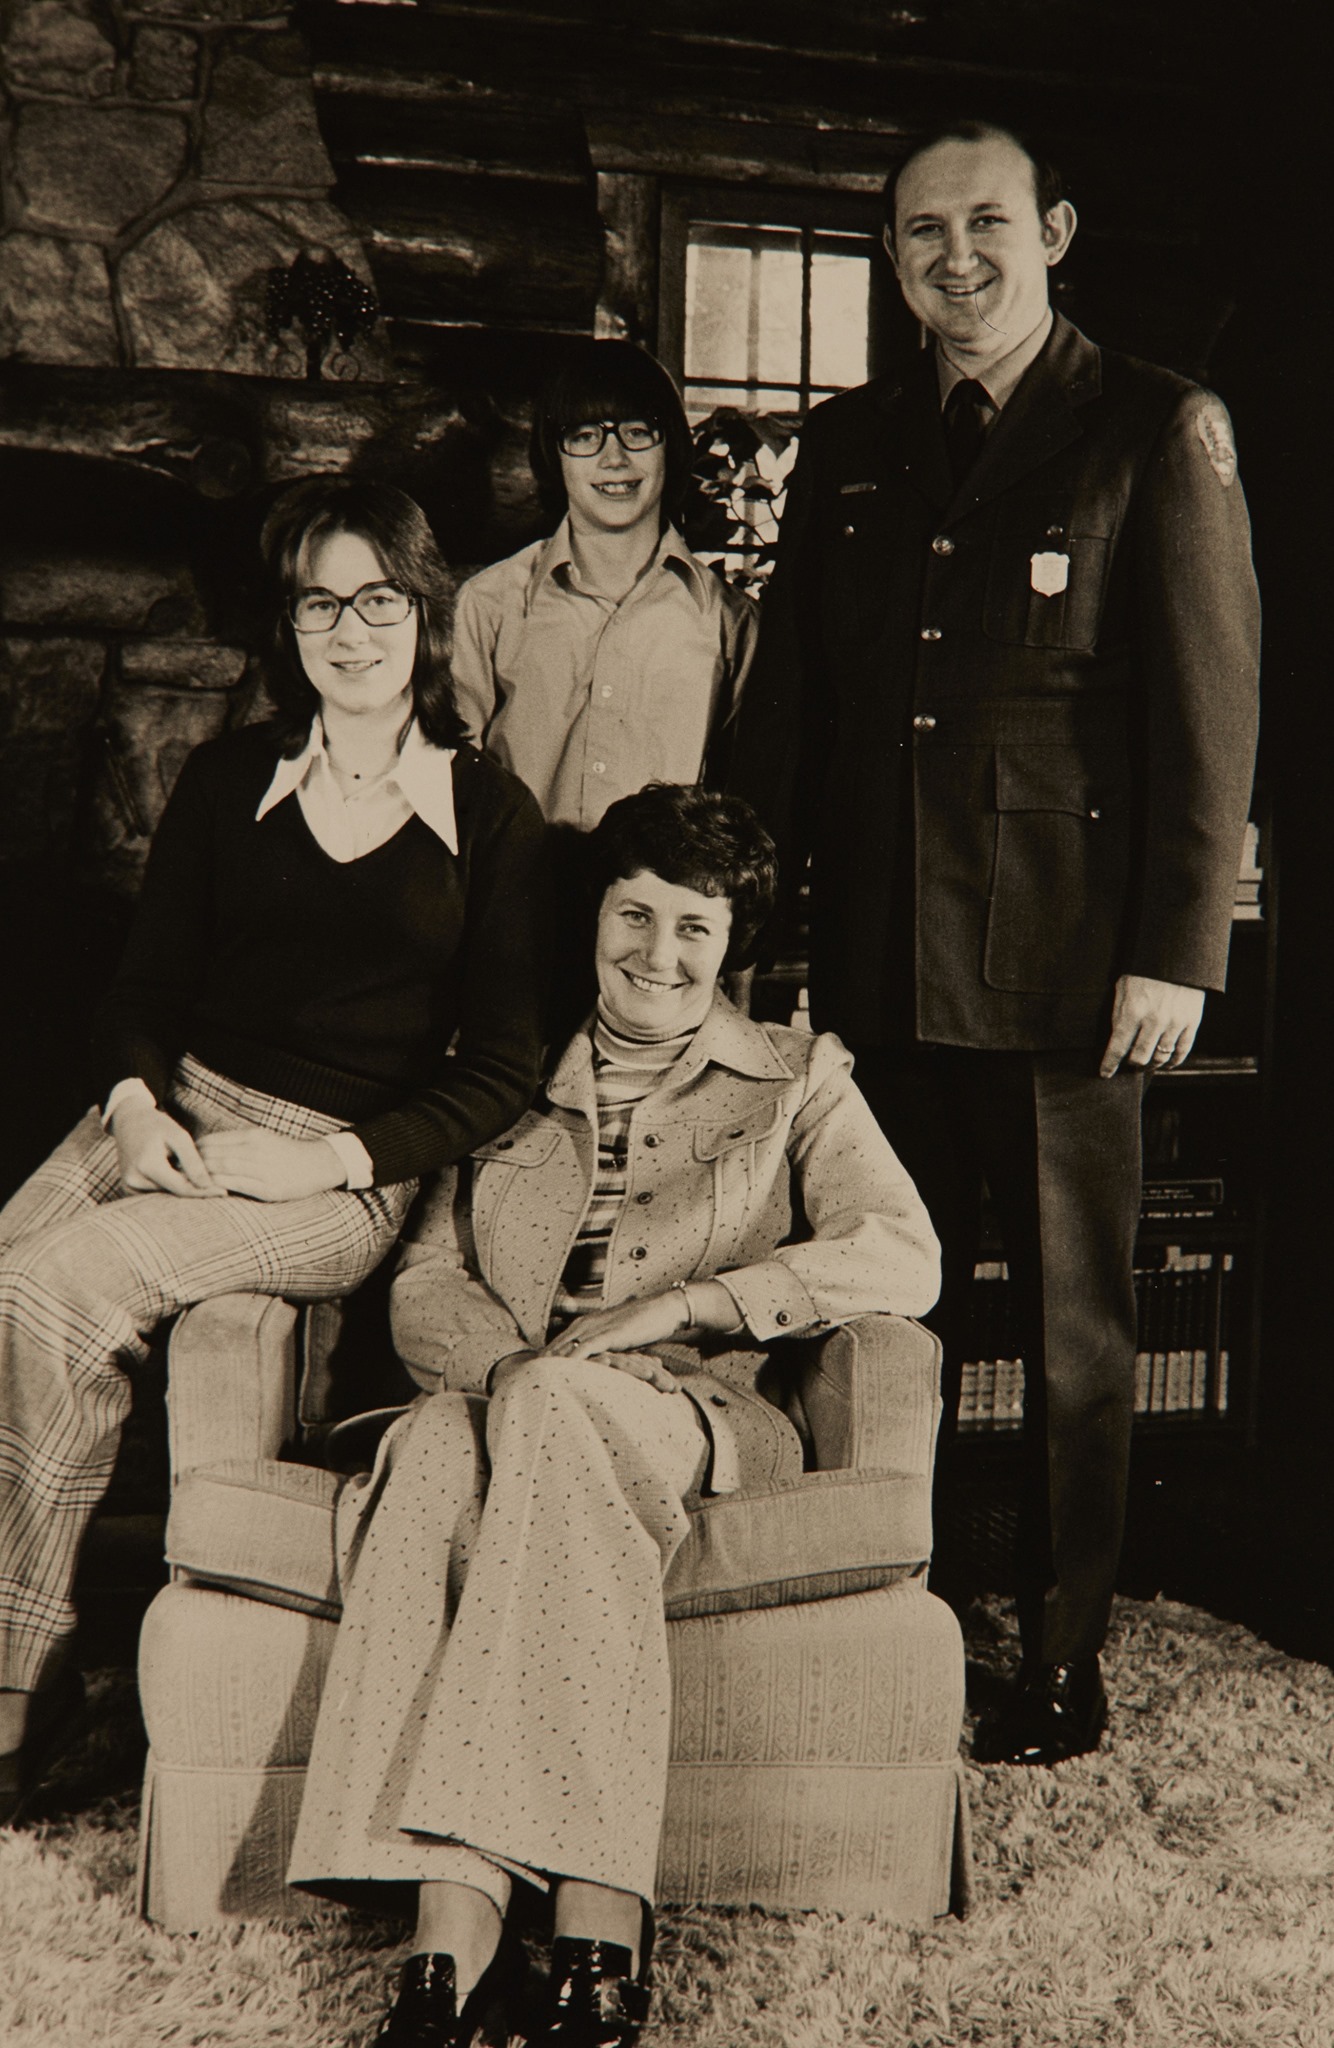 A sepia-toned family portrait. A man in a NPS uniform stands next to a son with glasses. A woman sits on an armchair in front, with a daughter with glasses on one arm of the chair. All are smiling.